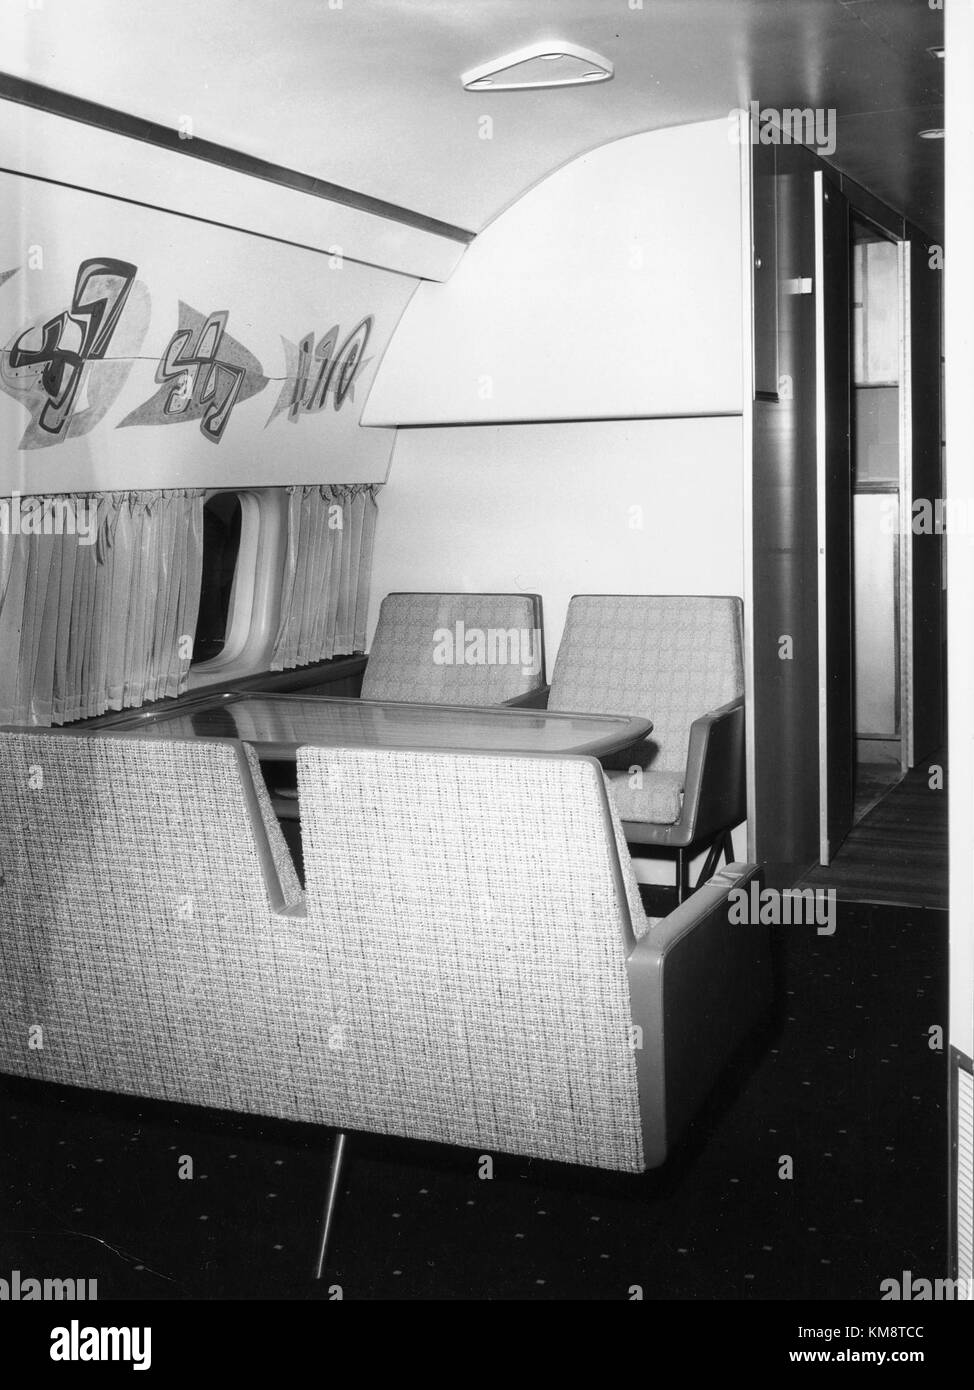 Sas Dc 8 33 Interior And Design Before Delivery Cabin And